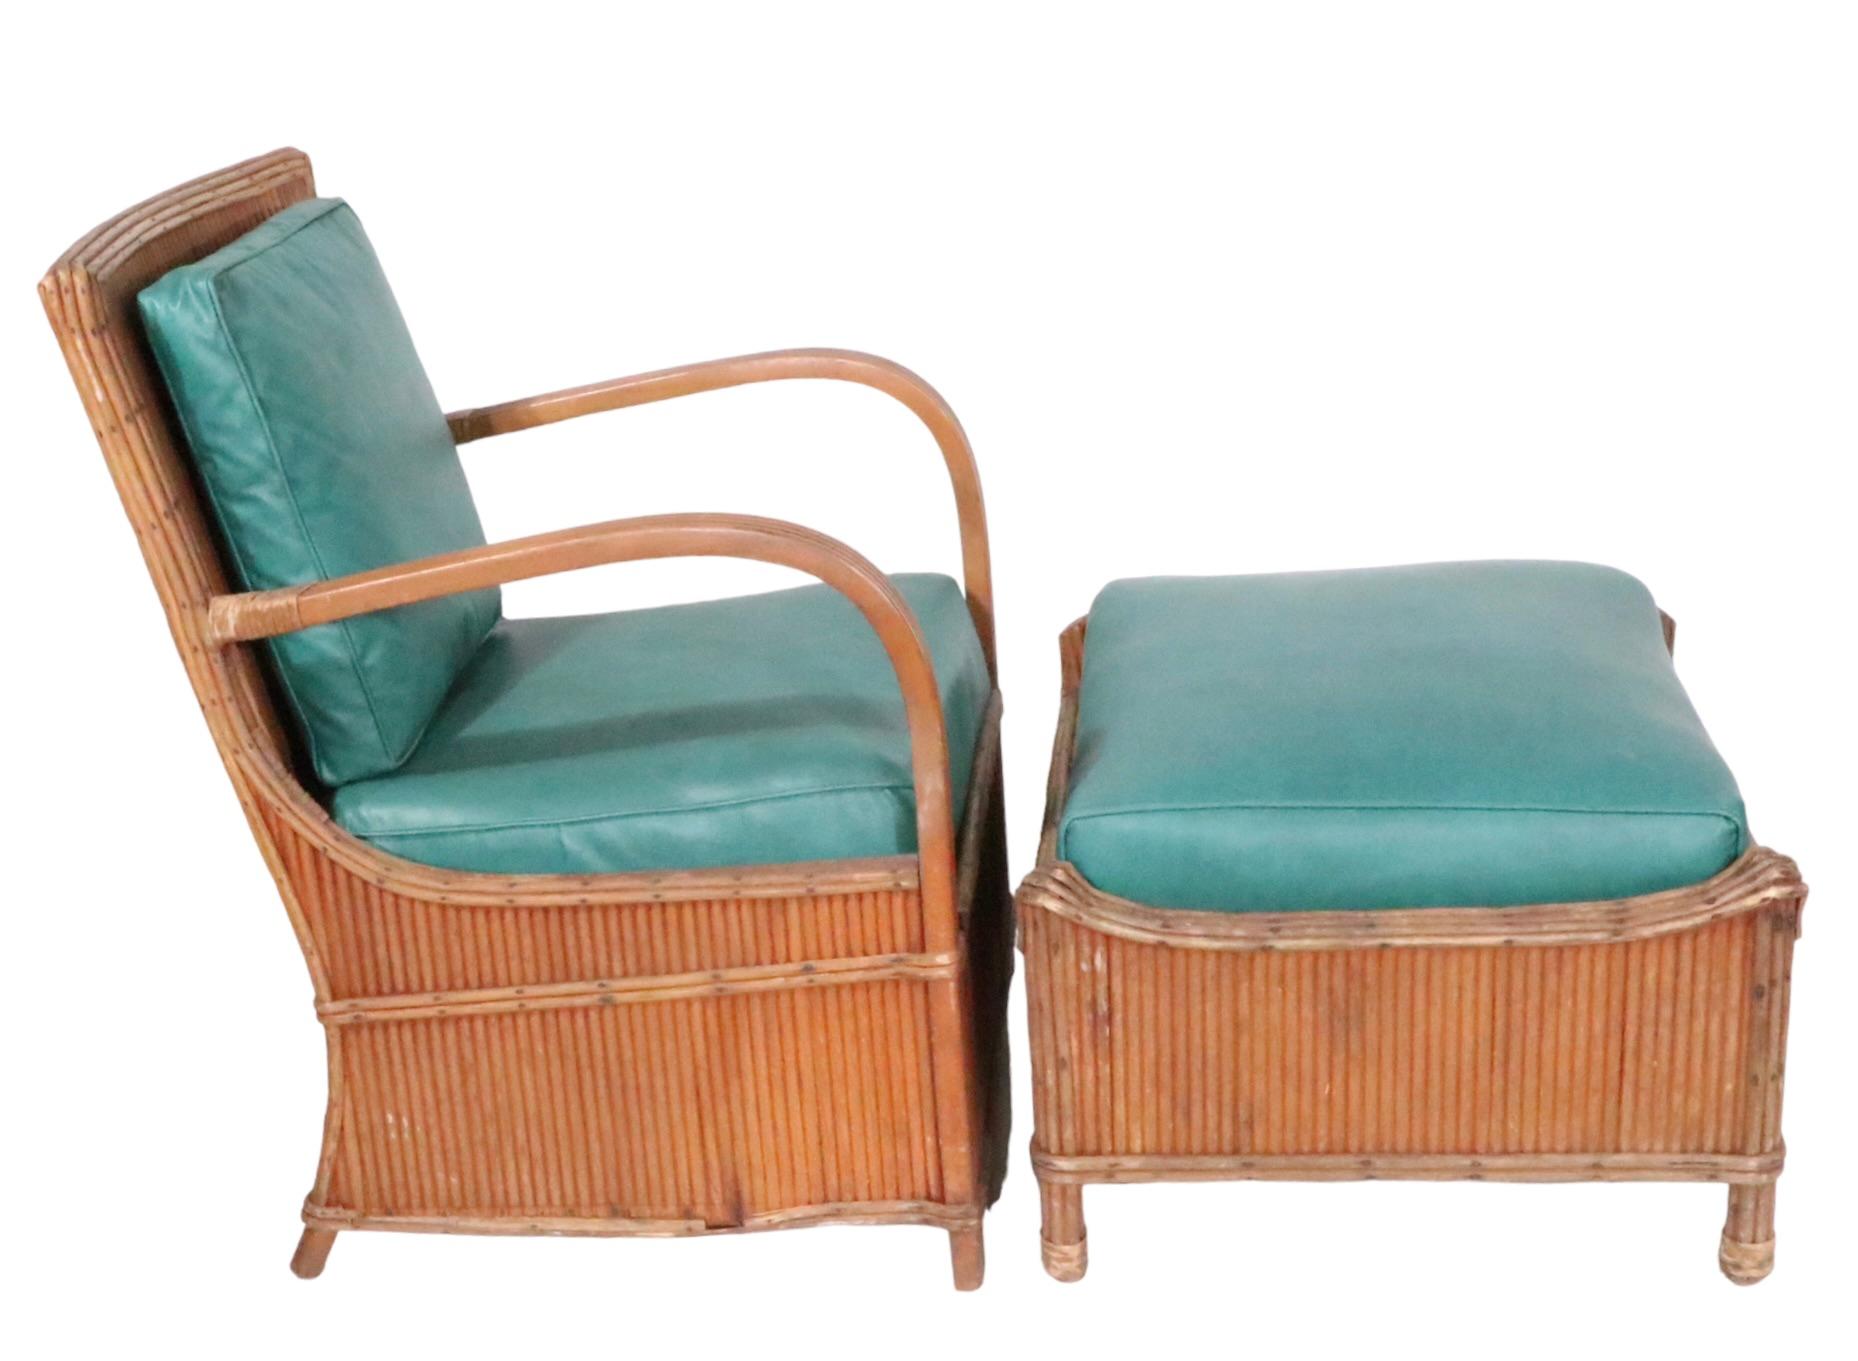 Four Piece Group of Art Deco Rattan Pencil Reed Wicker by the American Chair Co. For Sale 4